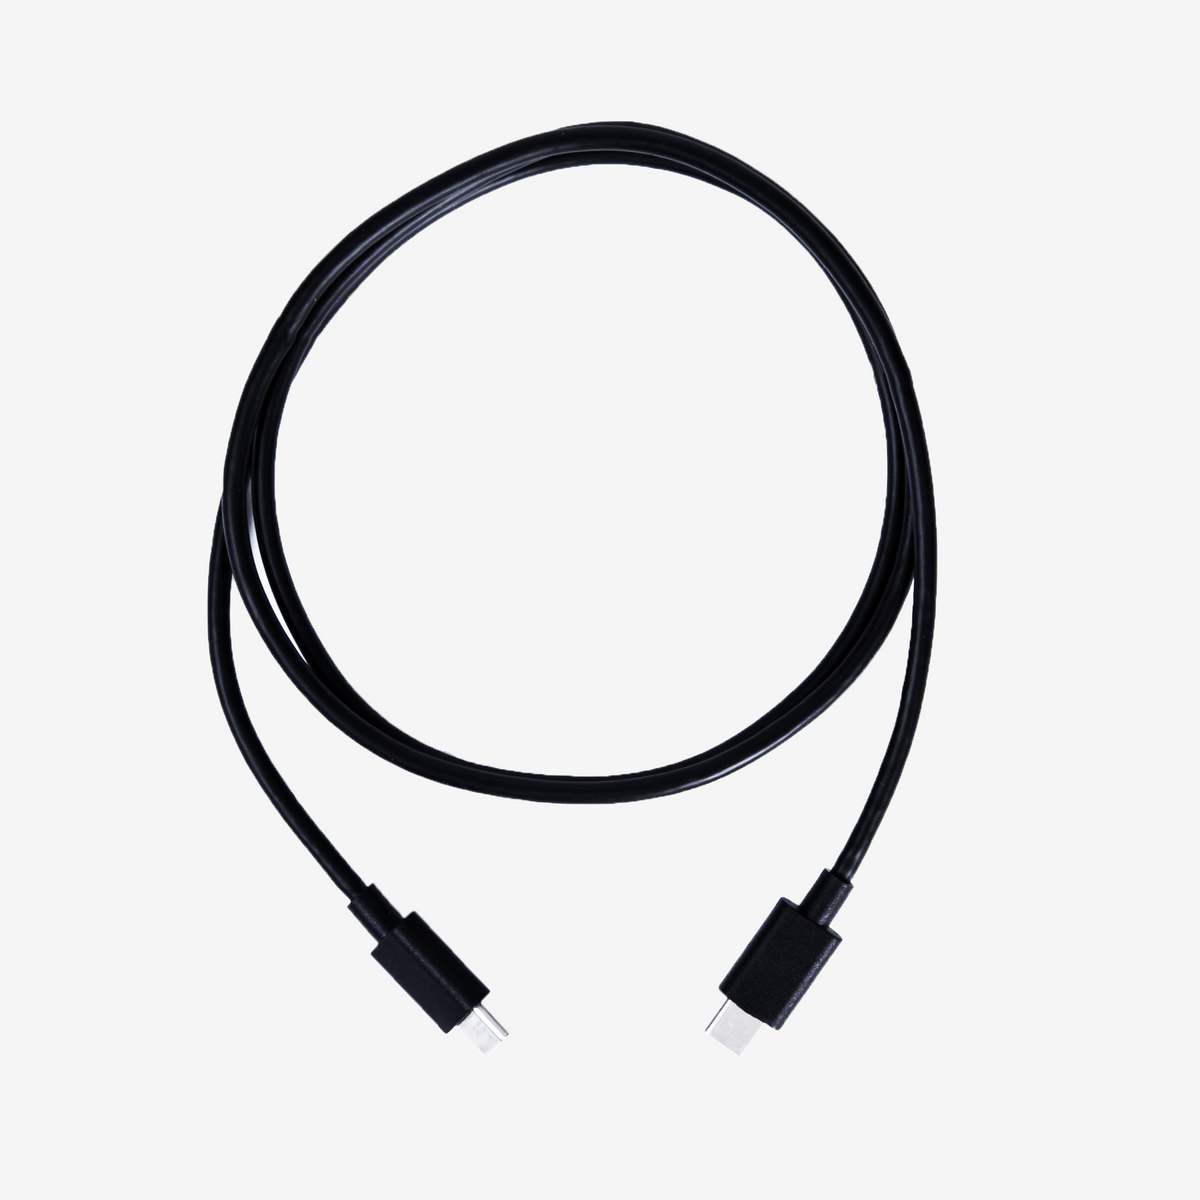 USB C to USB C 2.0 Cable (1 m)